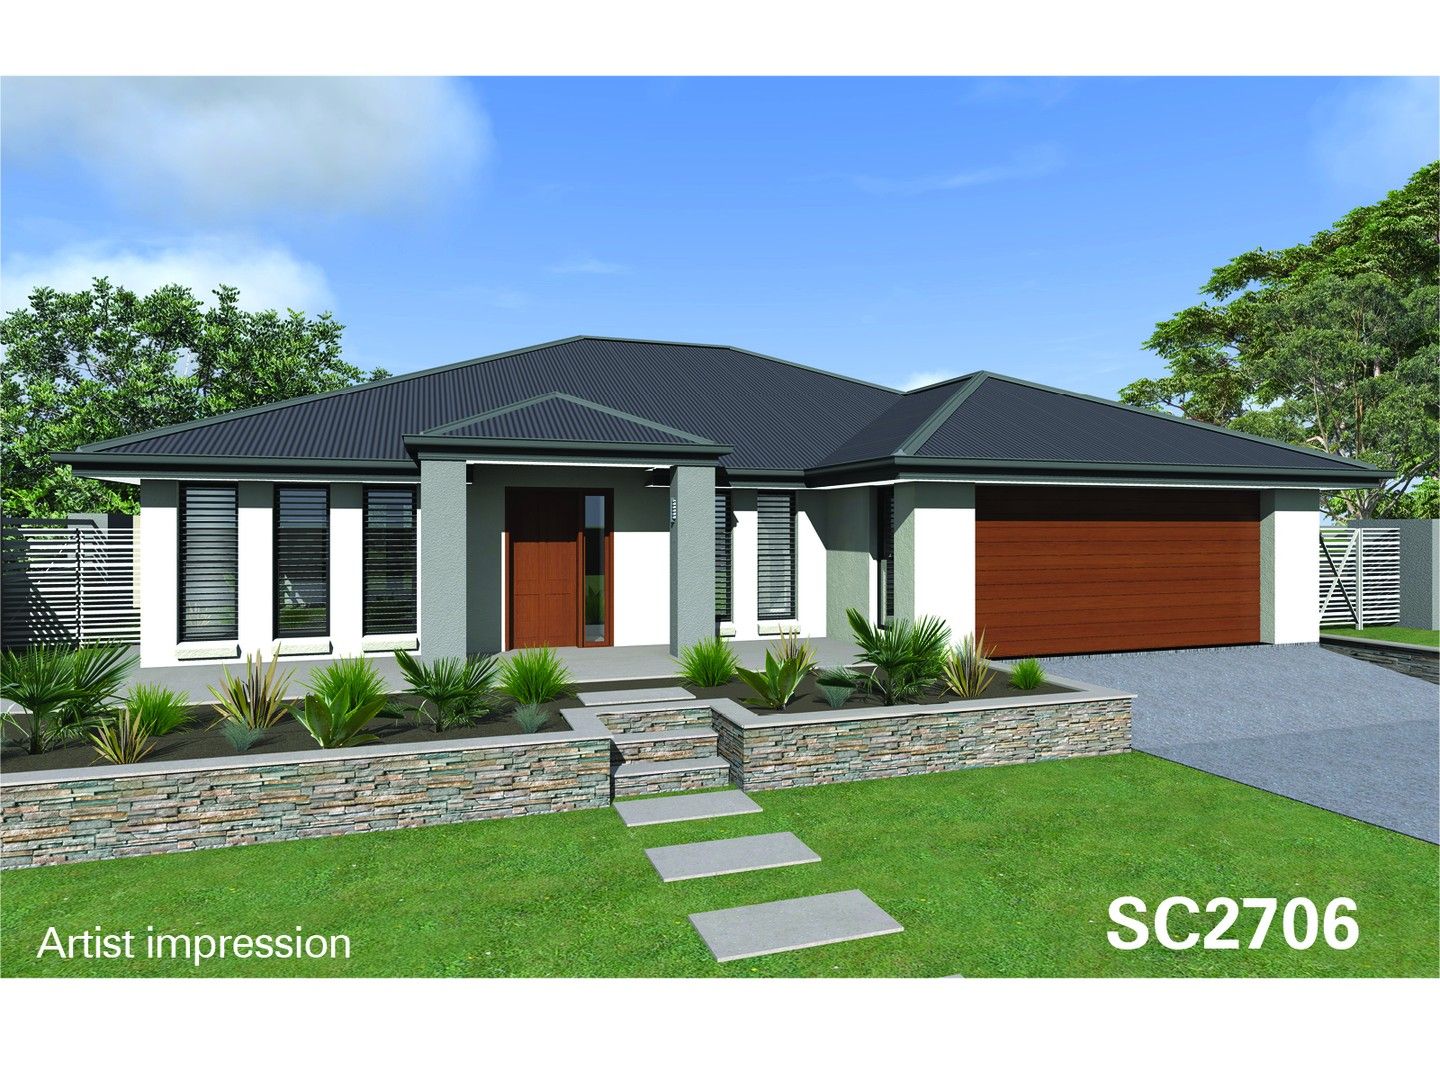 4 bedrooms New House & Land in 29 Highpoint Rd DUNDOWRAN QLD, 4655